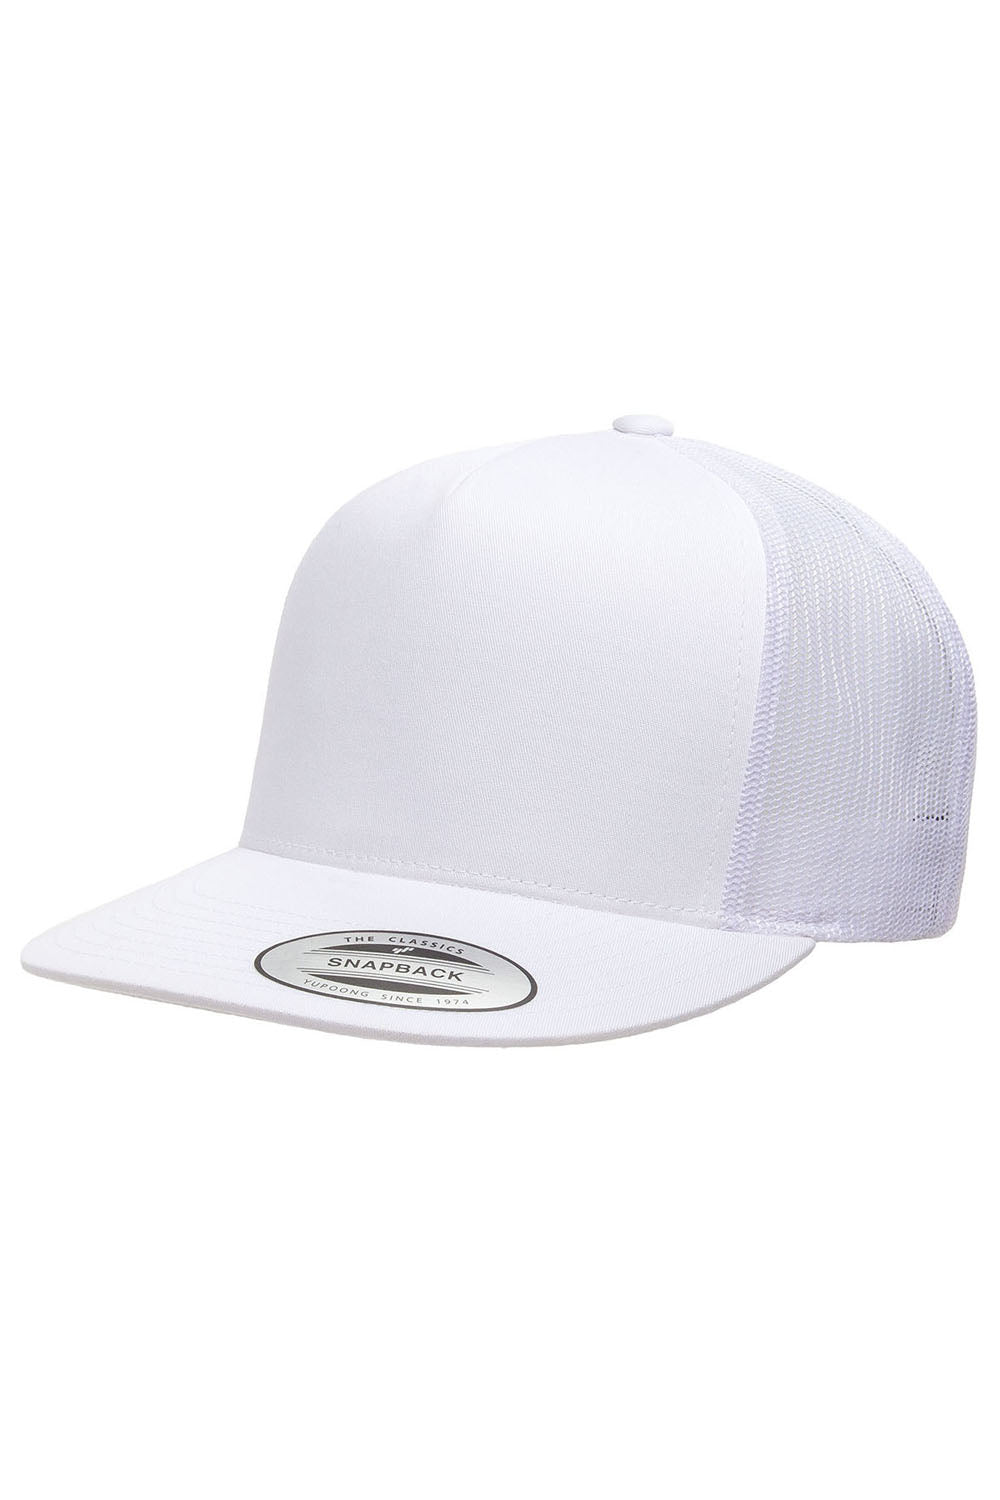 Yupoong 6006 Mens Adjustable Trucker Hat White Front